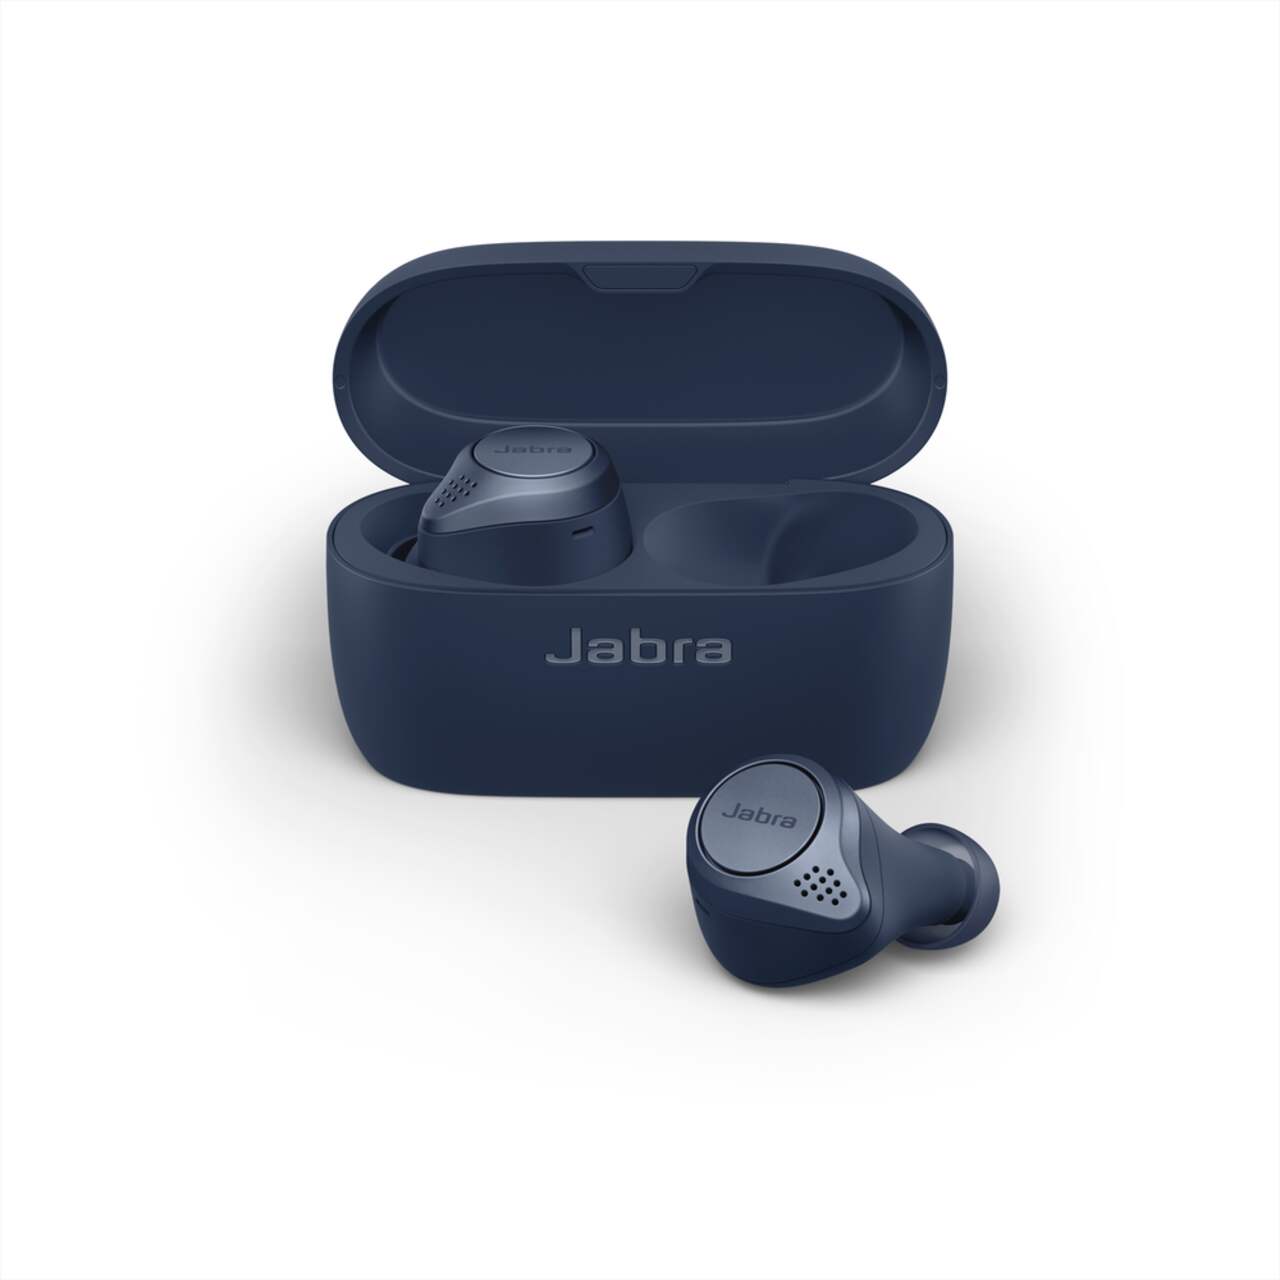 Jabra Elite Active 75t True Wireless Earbuds For Running And Sport,  Charging Case Included, Navy